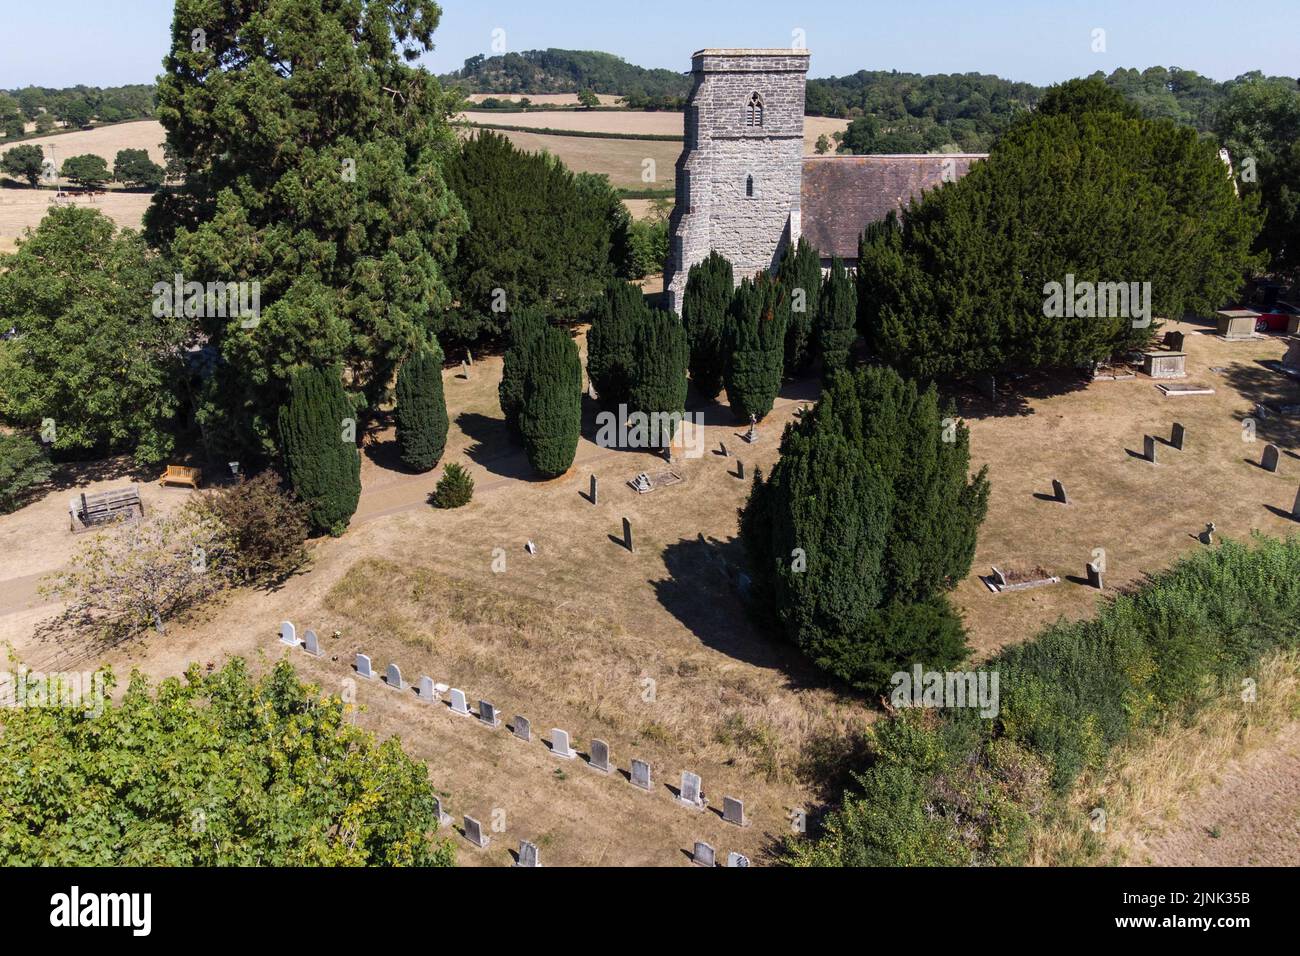 Forthampton, Gloucestershire August 12th 2022 - The small historic hamlet of Forthampton in Gloucestershire has been hit hard by drought conditions with 2 ponds dried up and the church, St. Mary the Virgin, is surrounded by brown dry grass. Credit: SCOTT CM/Alamy Live News Stock Photo